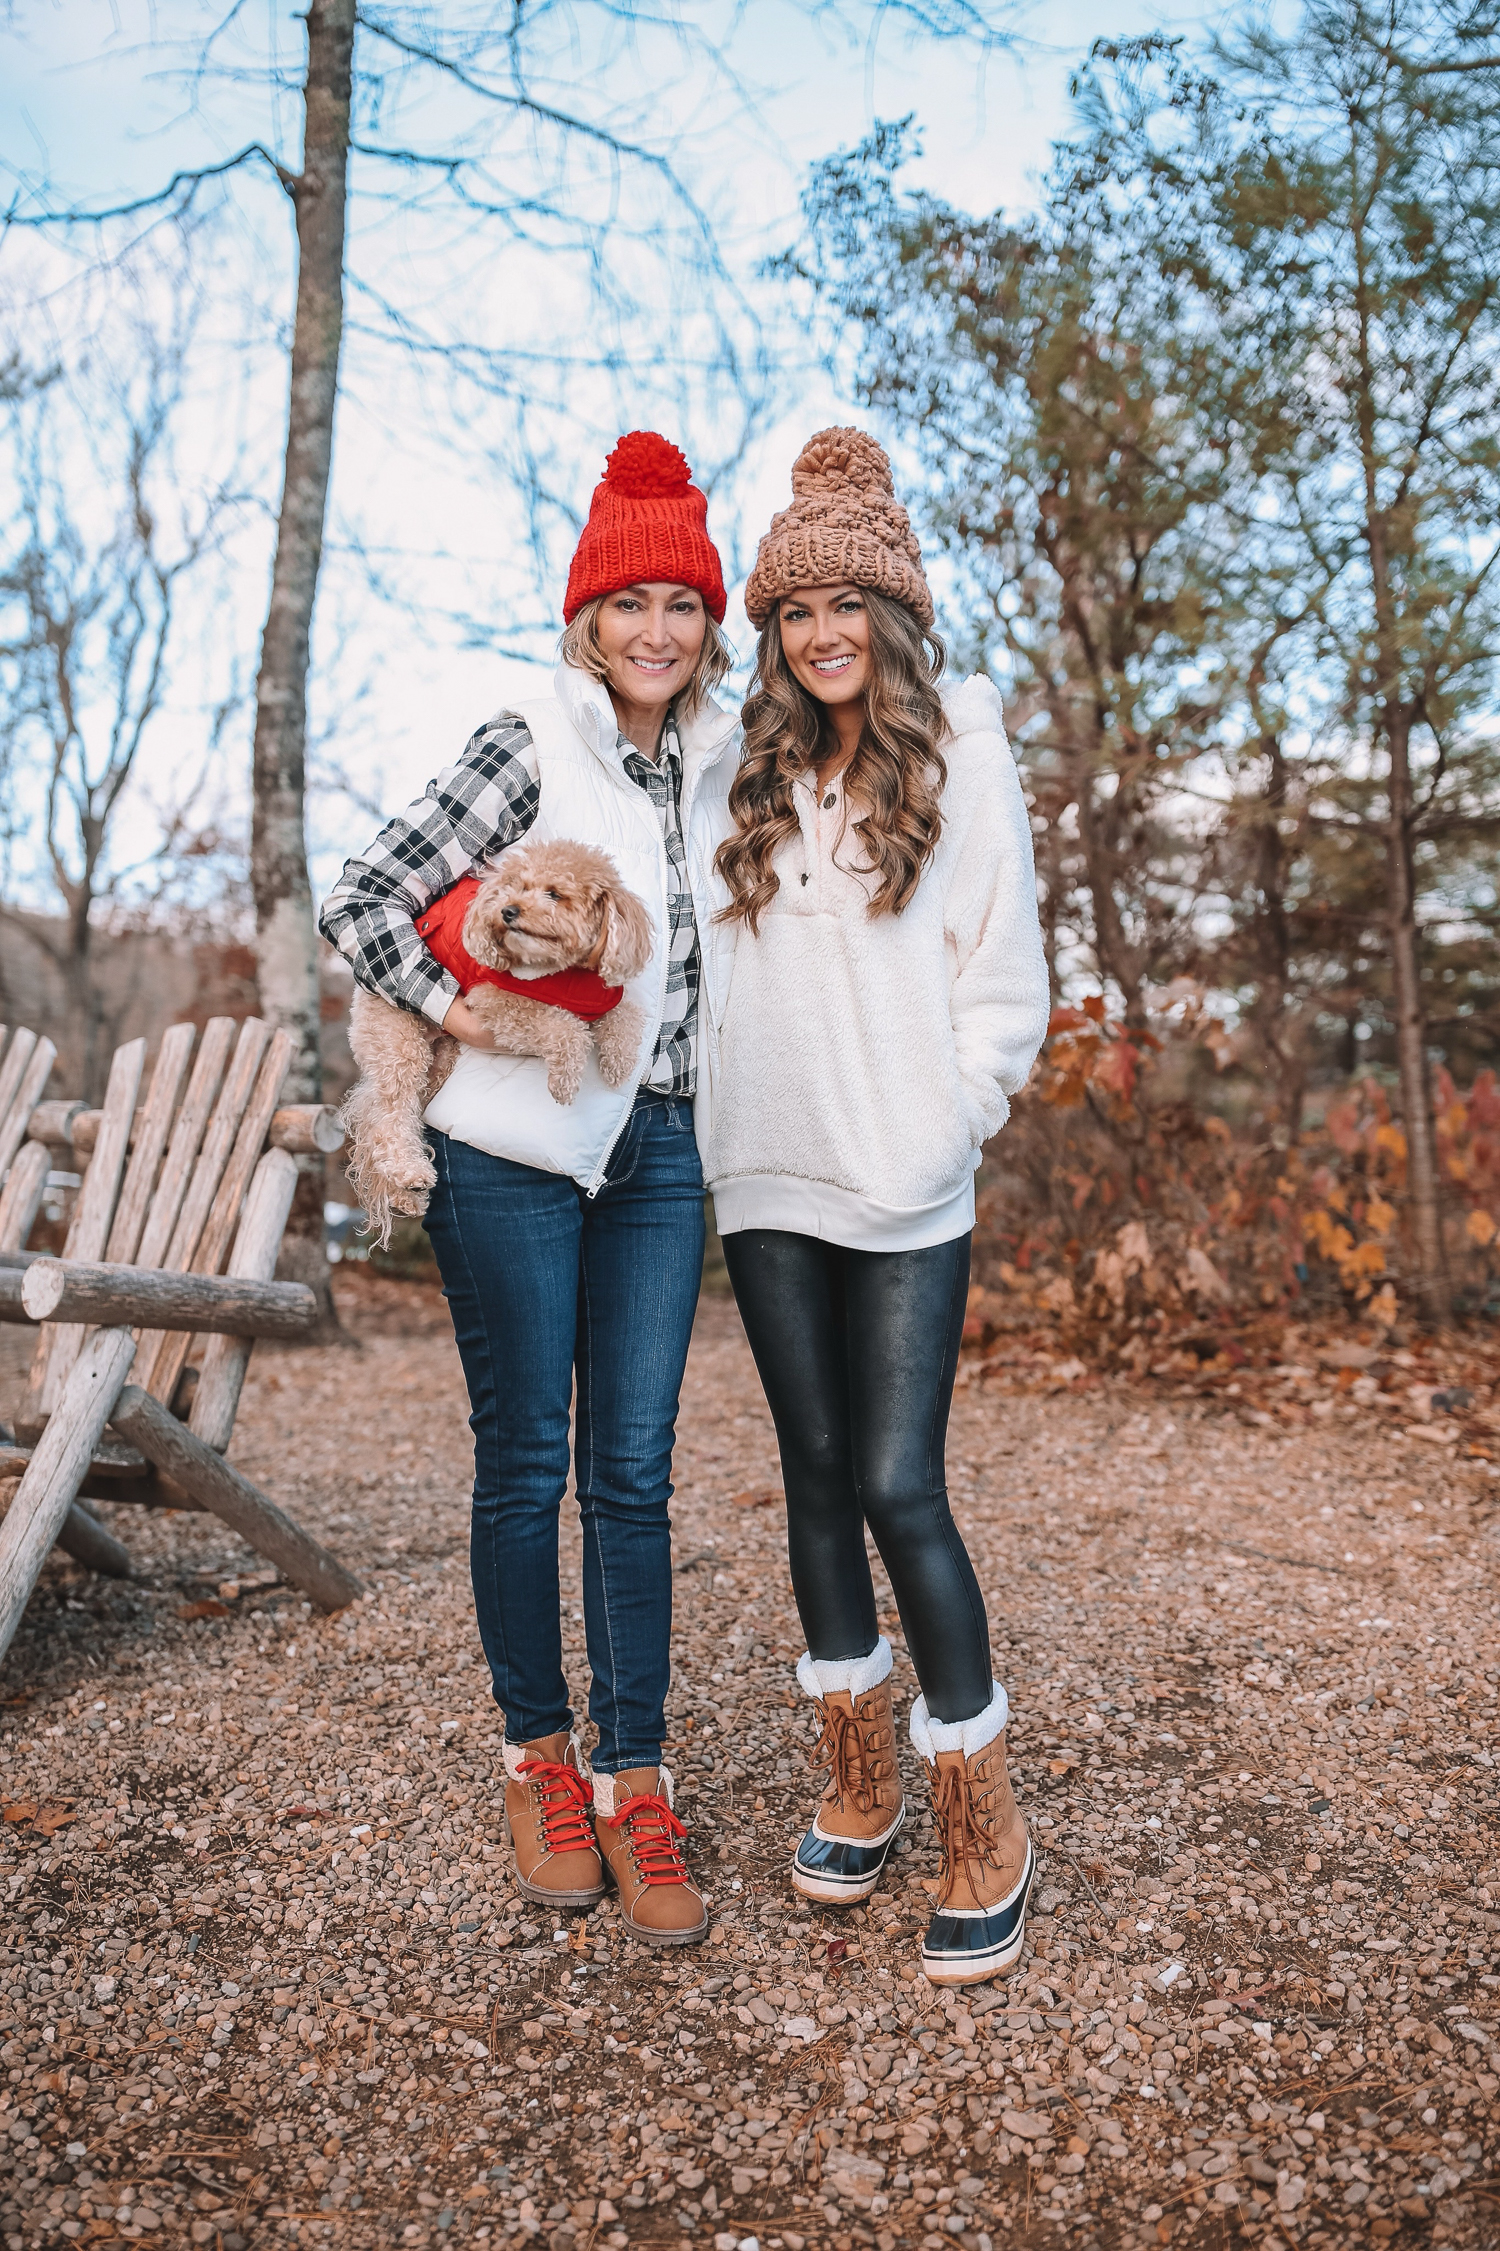 https://www.southerncurlsandpearls.com/wp-content/uploads/2019/11/walmart-cozy-outfits-winter-boots-affordable-1.jpg